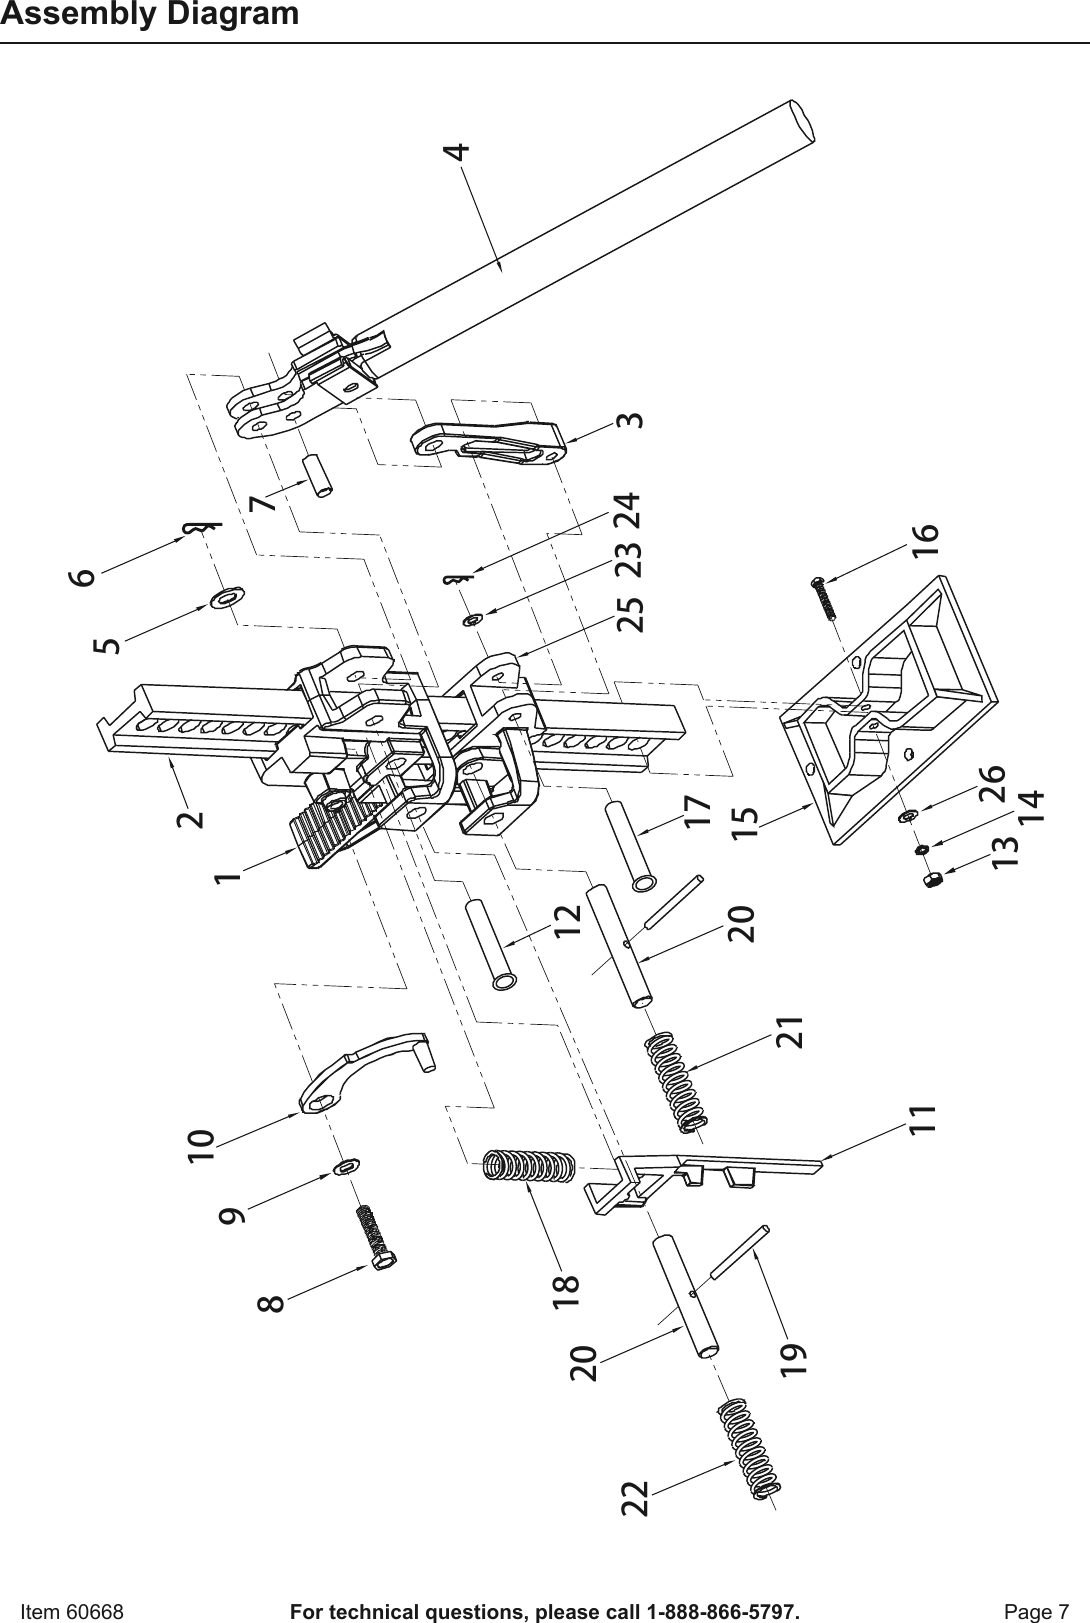 Page 7 of 8 - Manual For The 60668 42 In. High Lift Farm Jack